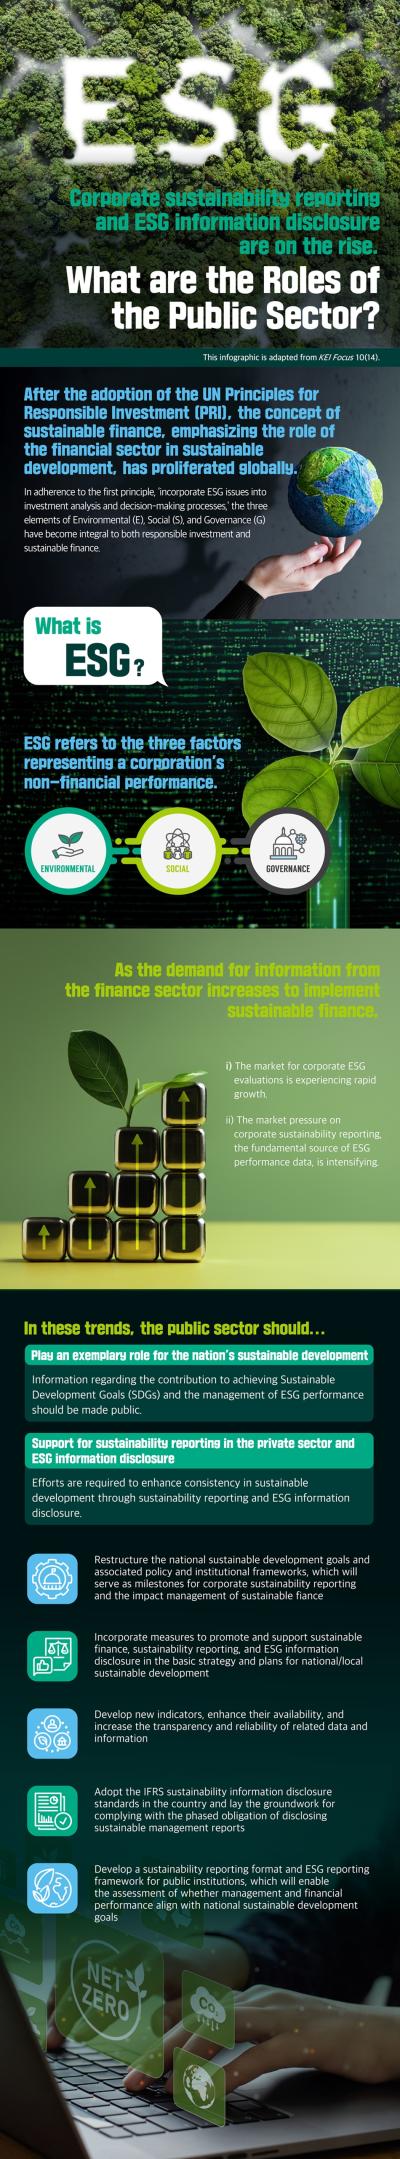 Corporate Sustainability Reporting and ESG Information Disclosure: Roles of the Public Sector